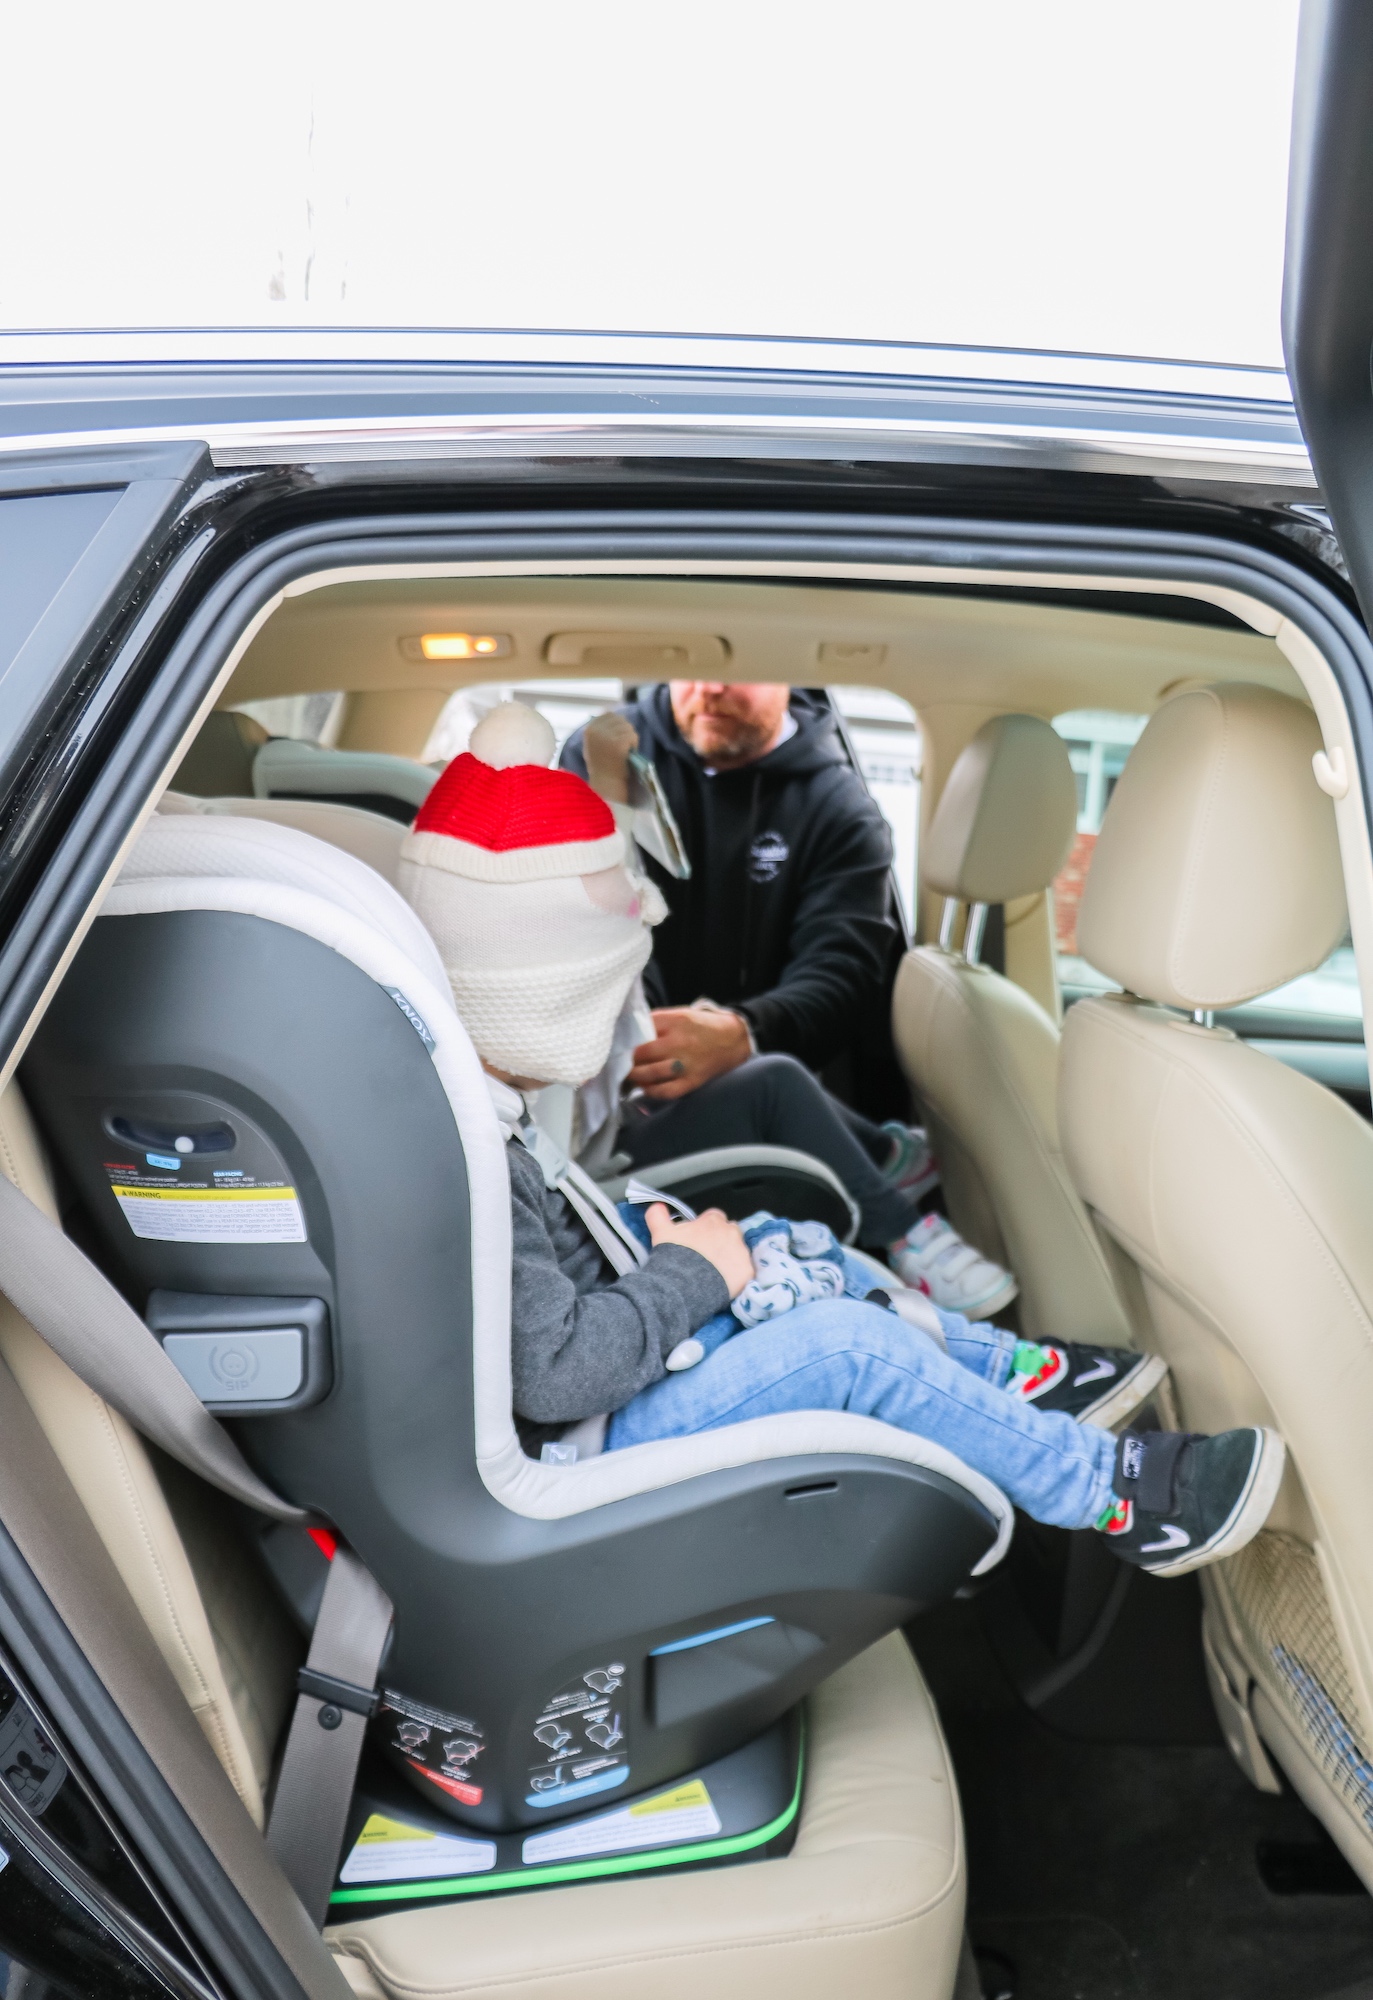 UPPAbaby car seat in small SUV